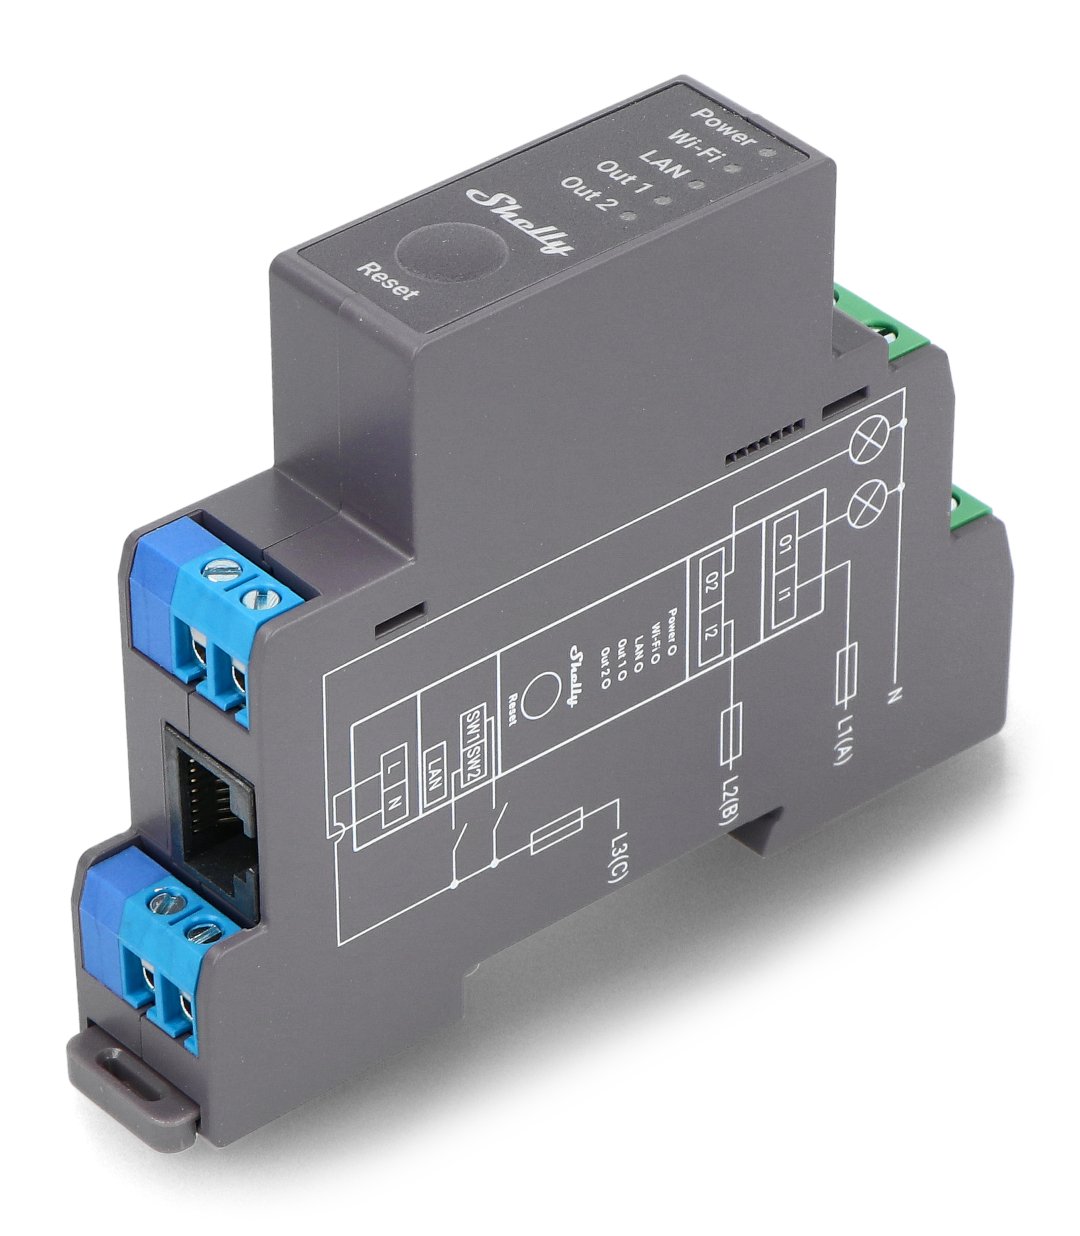 Shelly 2.5 - dual channel wifi relay with roller shutter mode